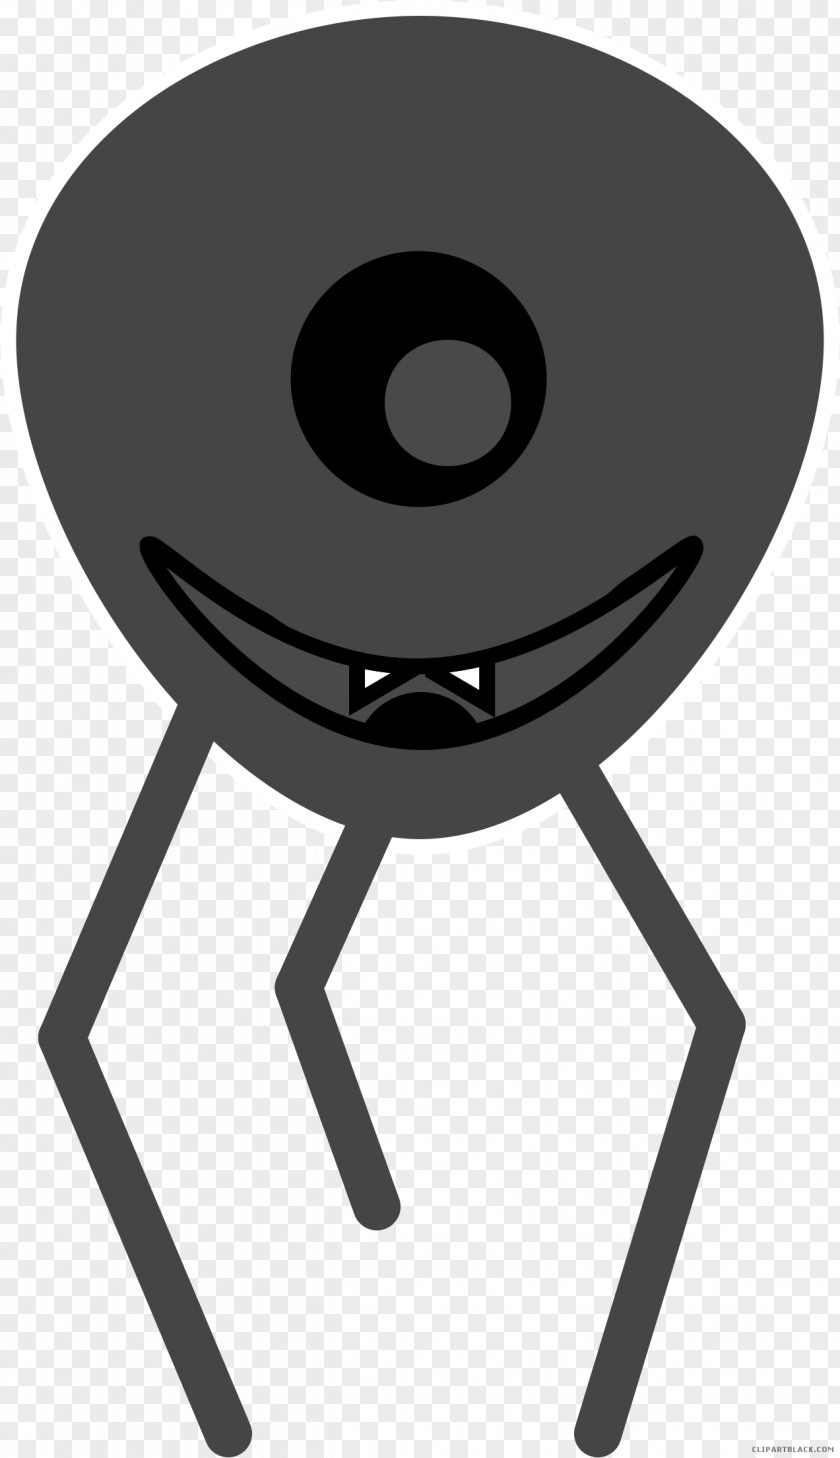 Smiley Octopus Clip Art Image PNG